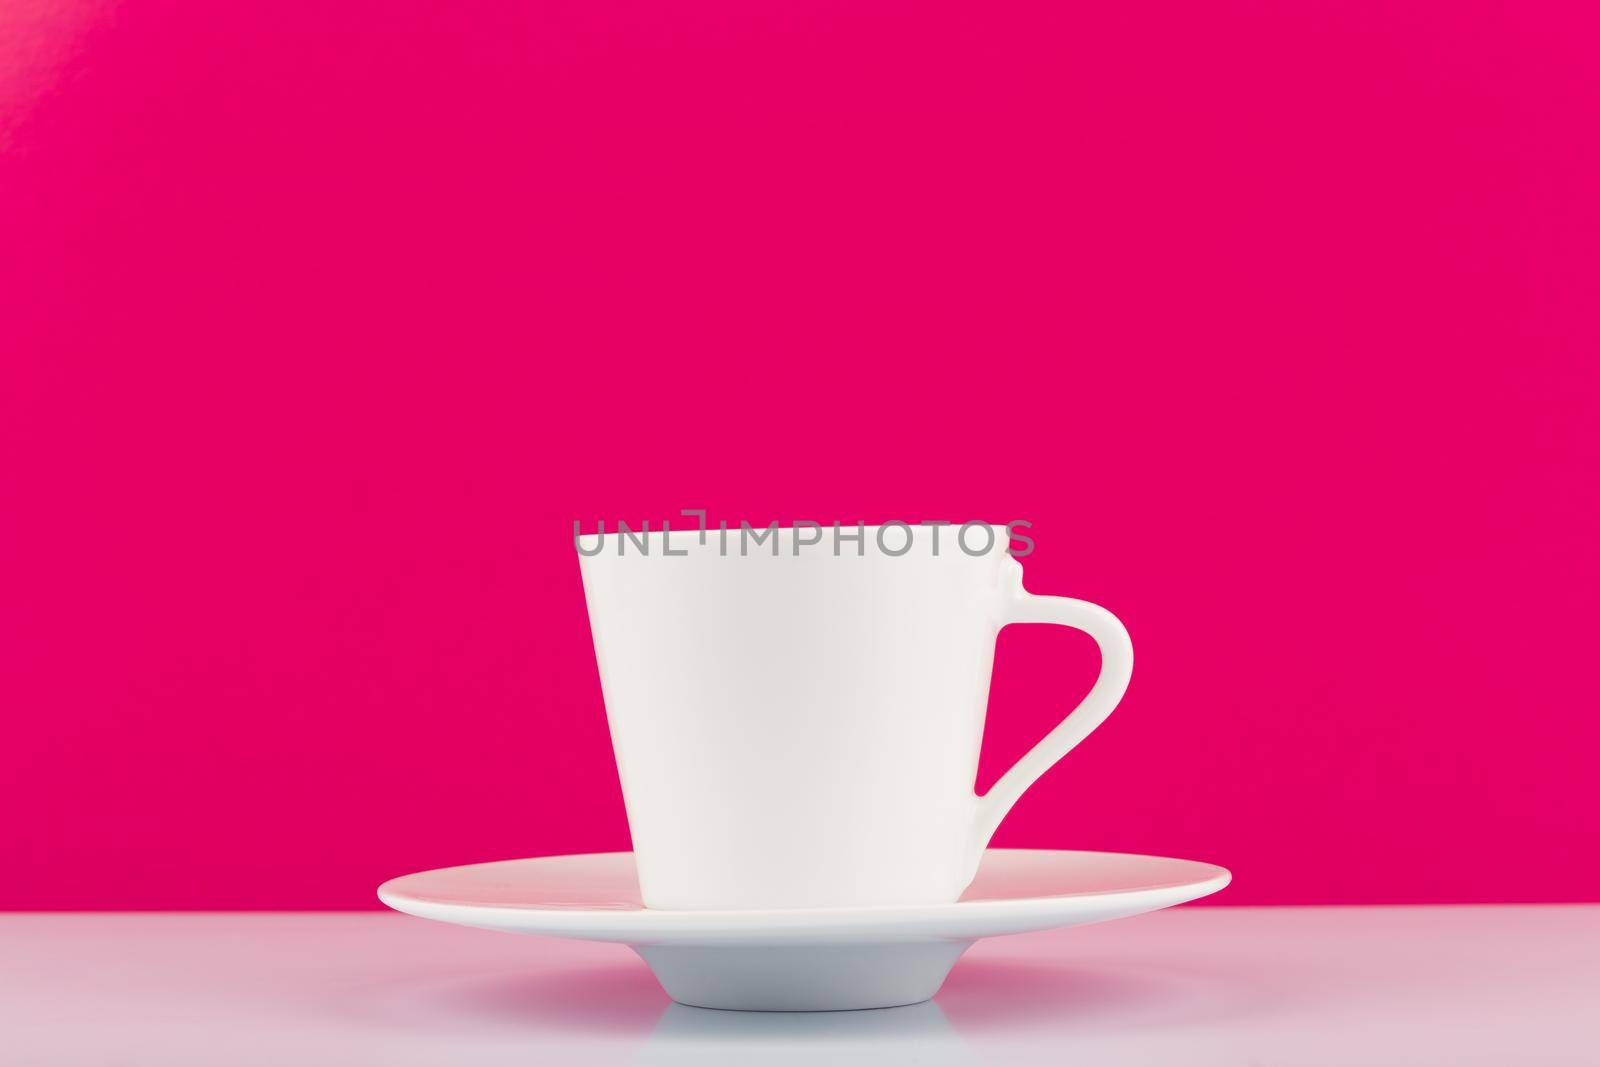 Minimalistic still life with white shiny ceramic coffee cup with saucer against pink background with copy space. High quality photo